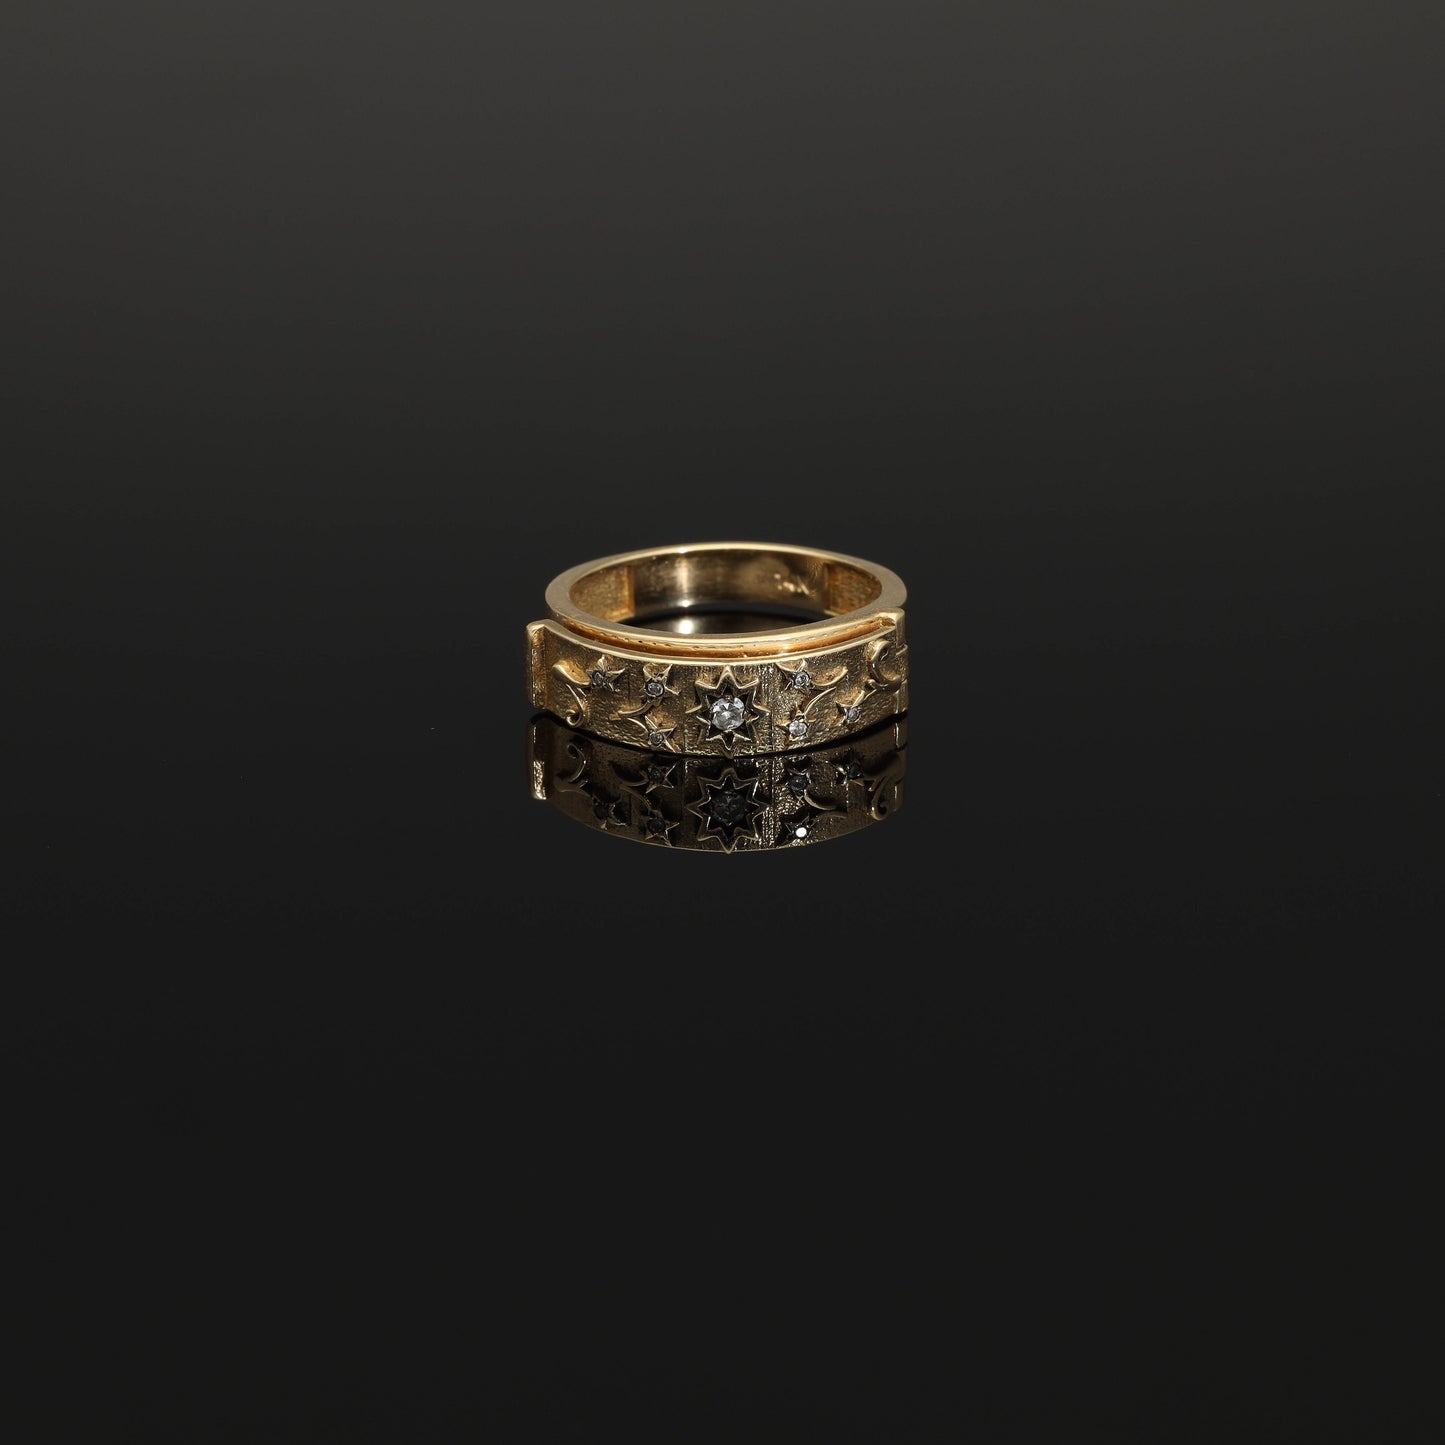 A unique unisex diamond secret compartment ring in solid 14k gold. This yellow gold so-called poison ring opens to a secret compartment which reads DARLING. A modern twist on Victorian era sentimental jewelry, this beautiful ring is produced on demand by our workshop.  The face of the ring has a celestial ornament depicting a star surrounded by foilate.